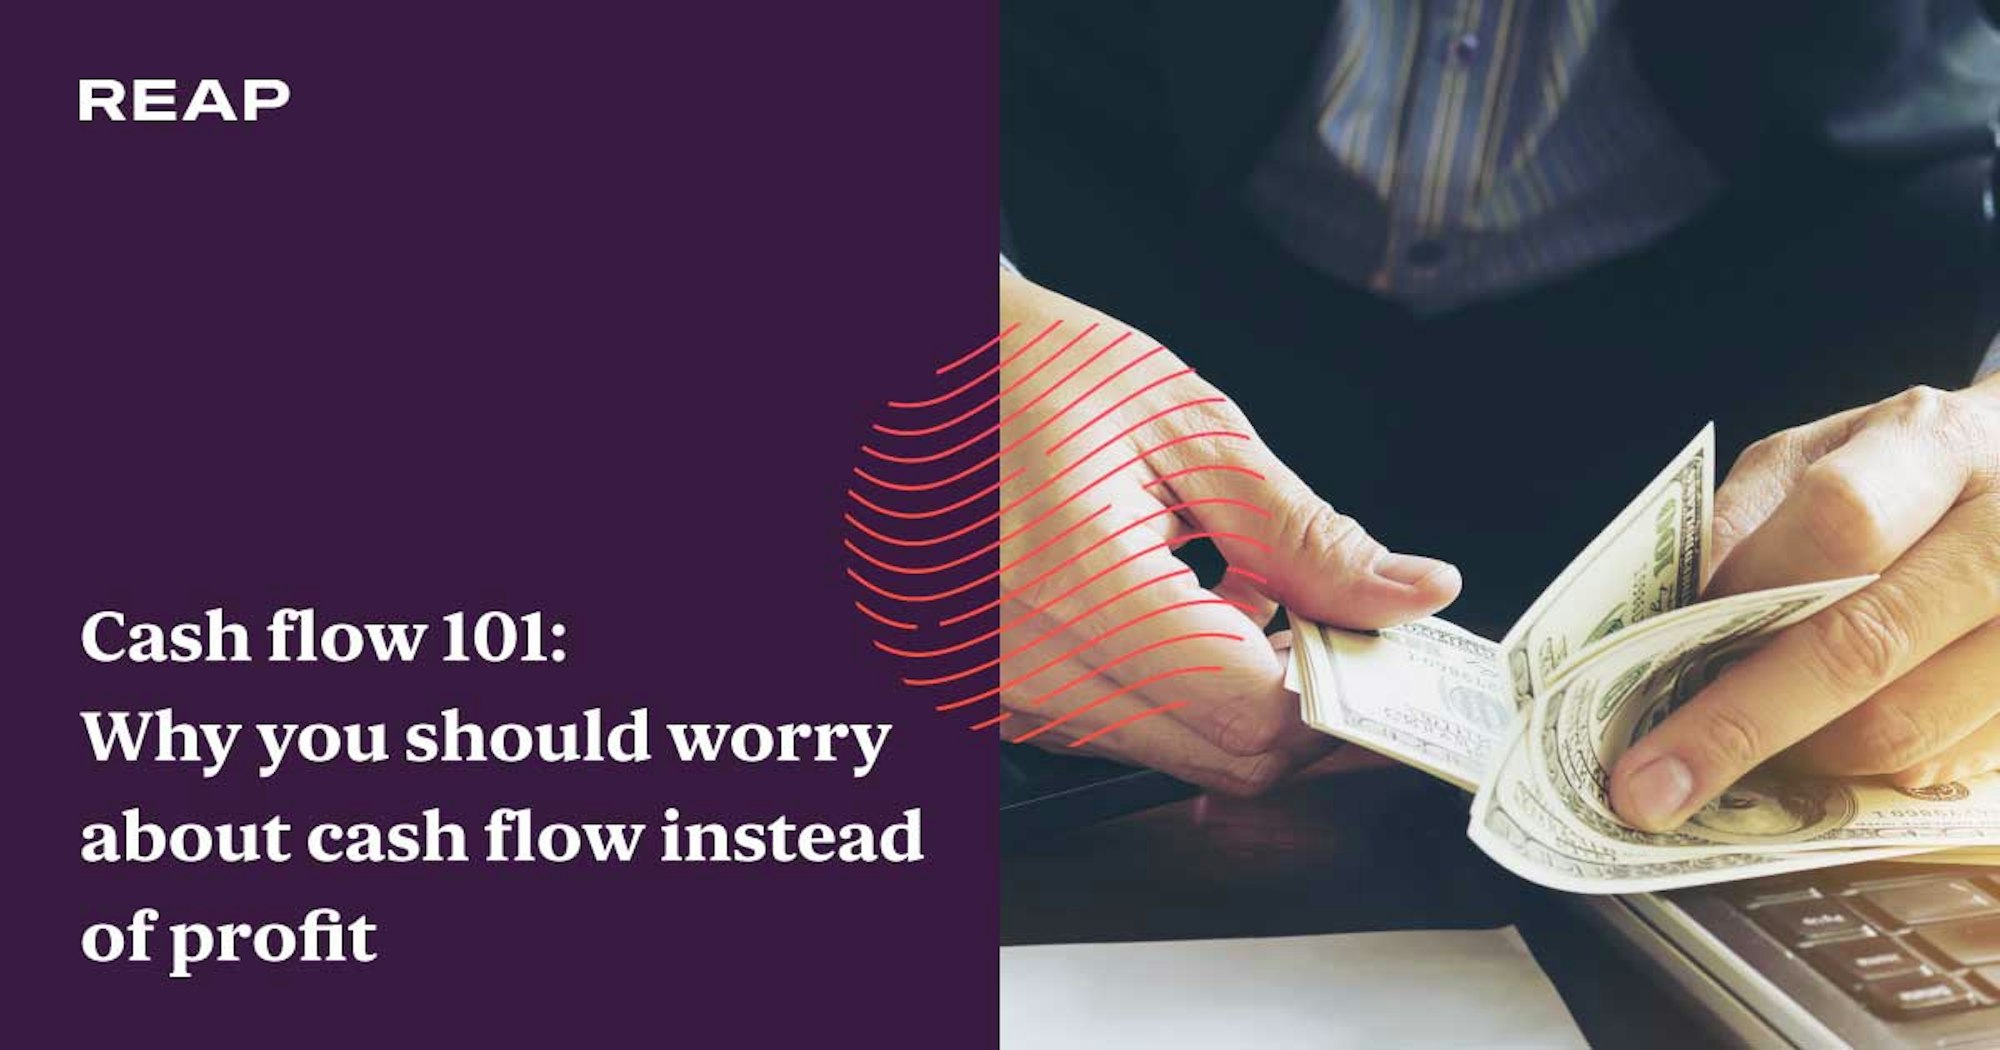 Cover Image for Cash flow 101: Why you should worry about cash flow instead of profit